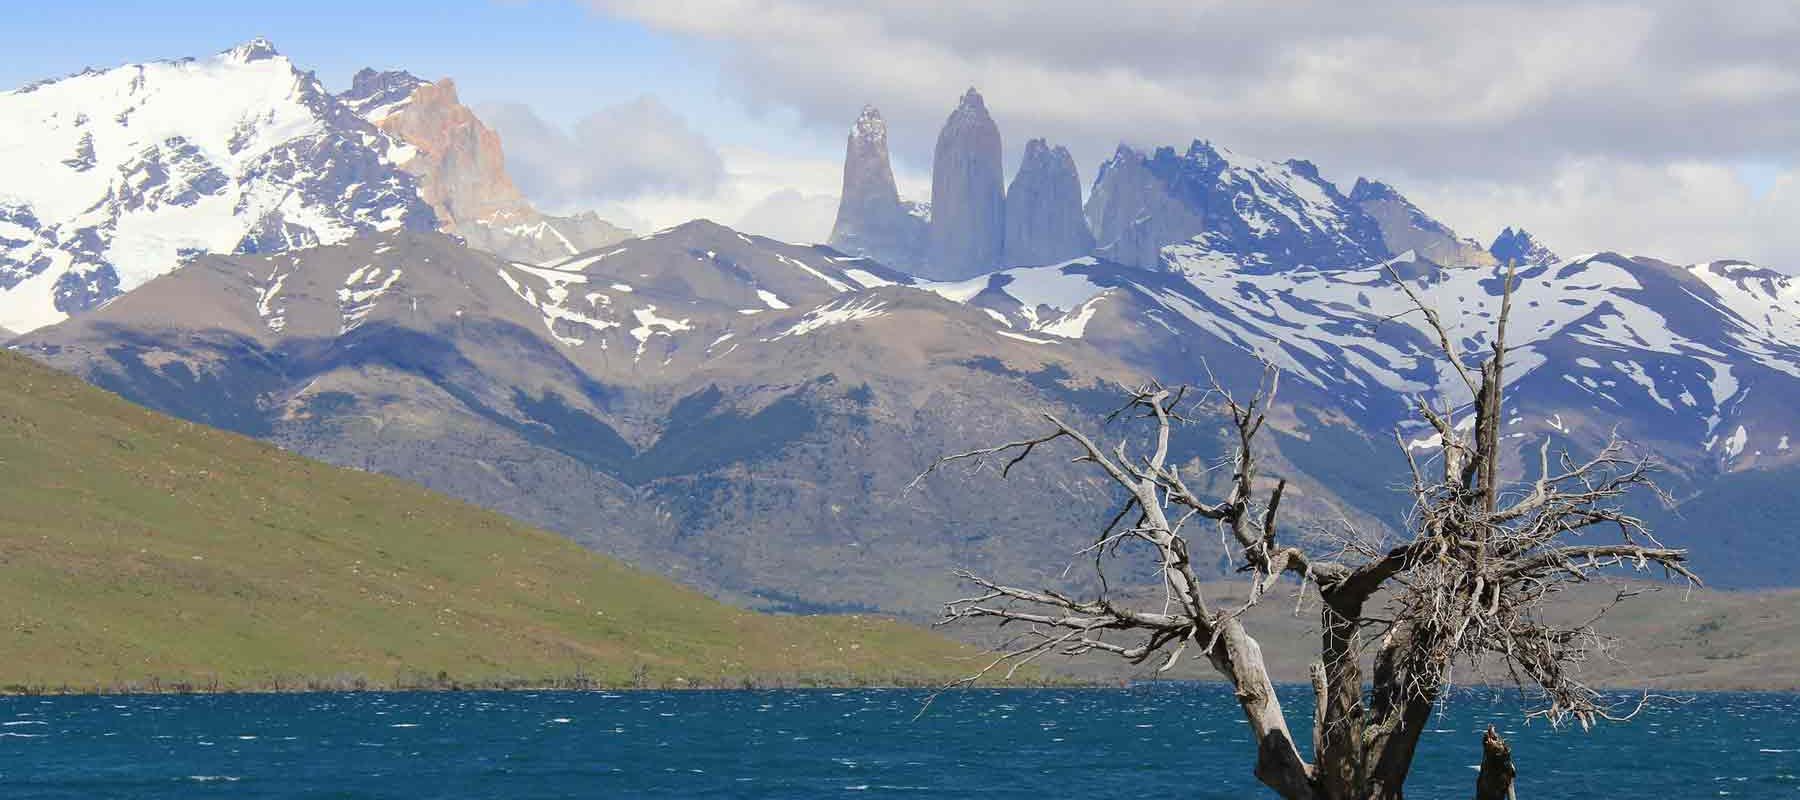 Mountains In Chile, Patagonia